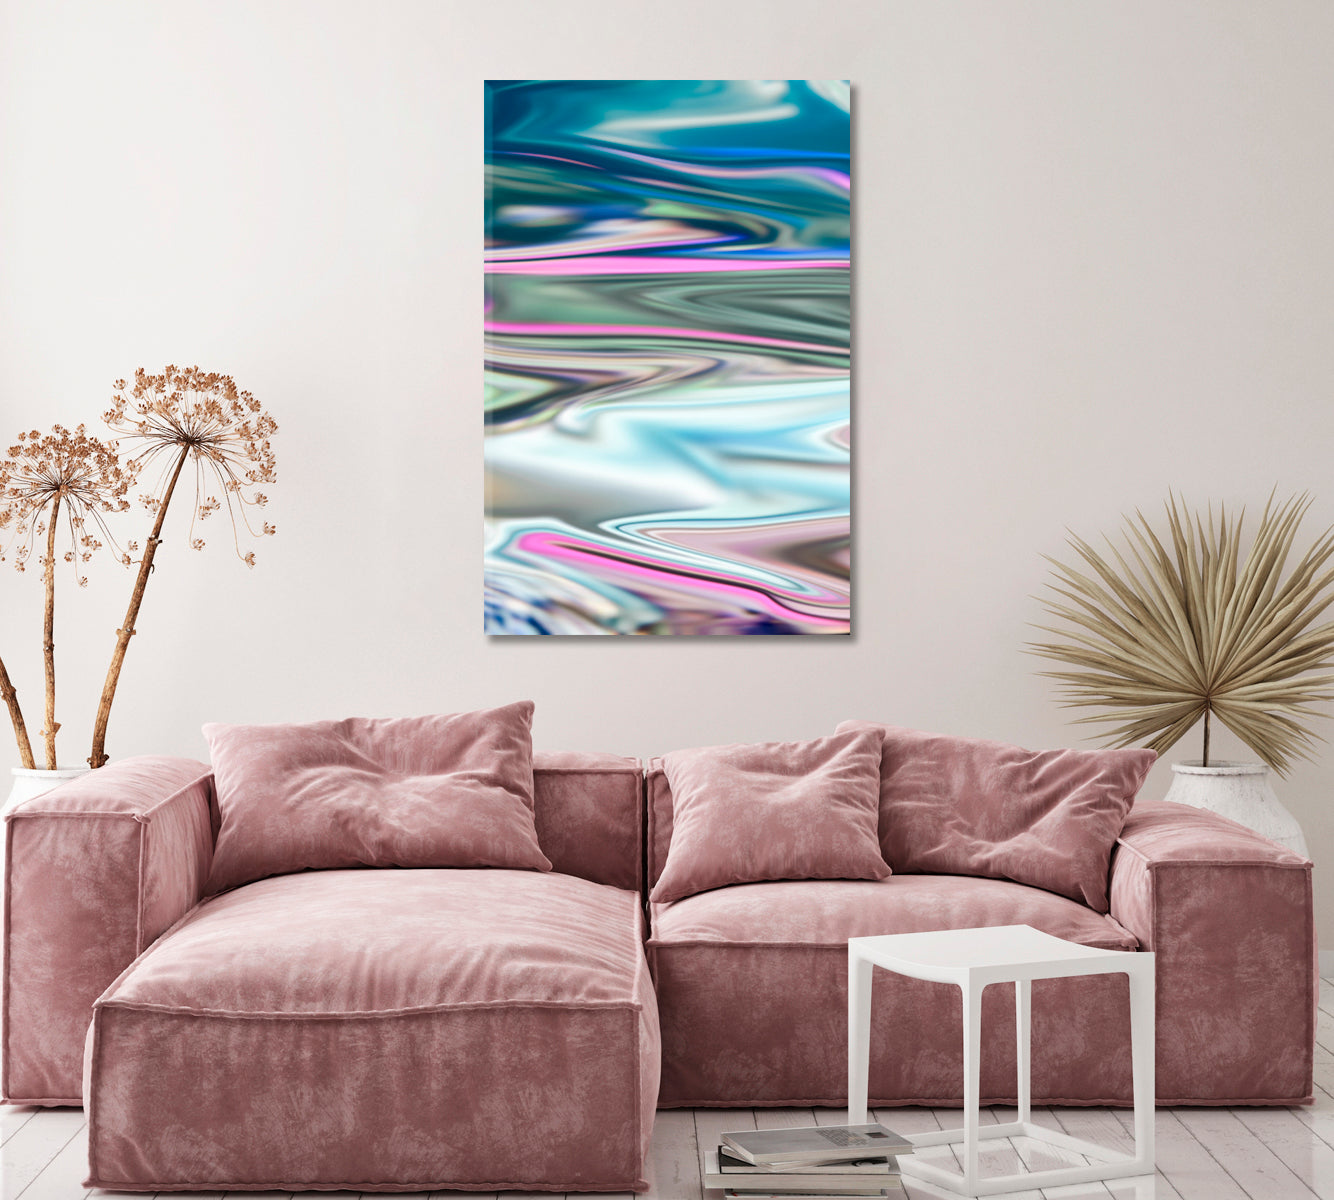 Abstract Holographic Liquid Metal Canvas Print ArtLexy 1 Panel 16"x24" inches 